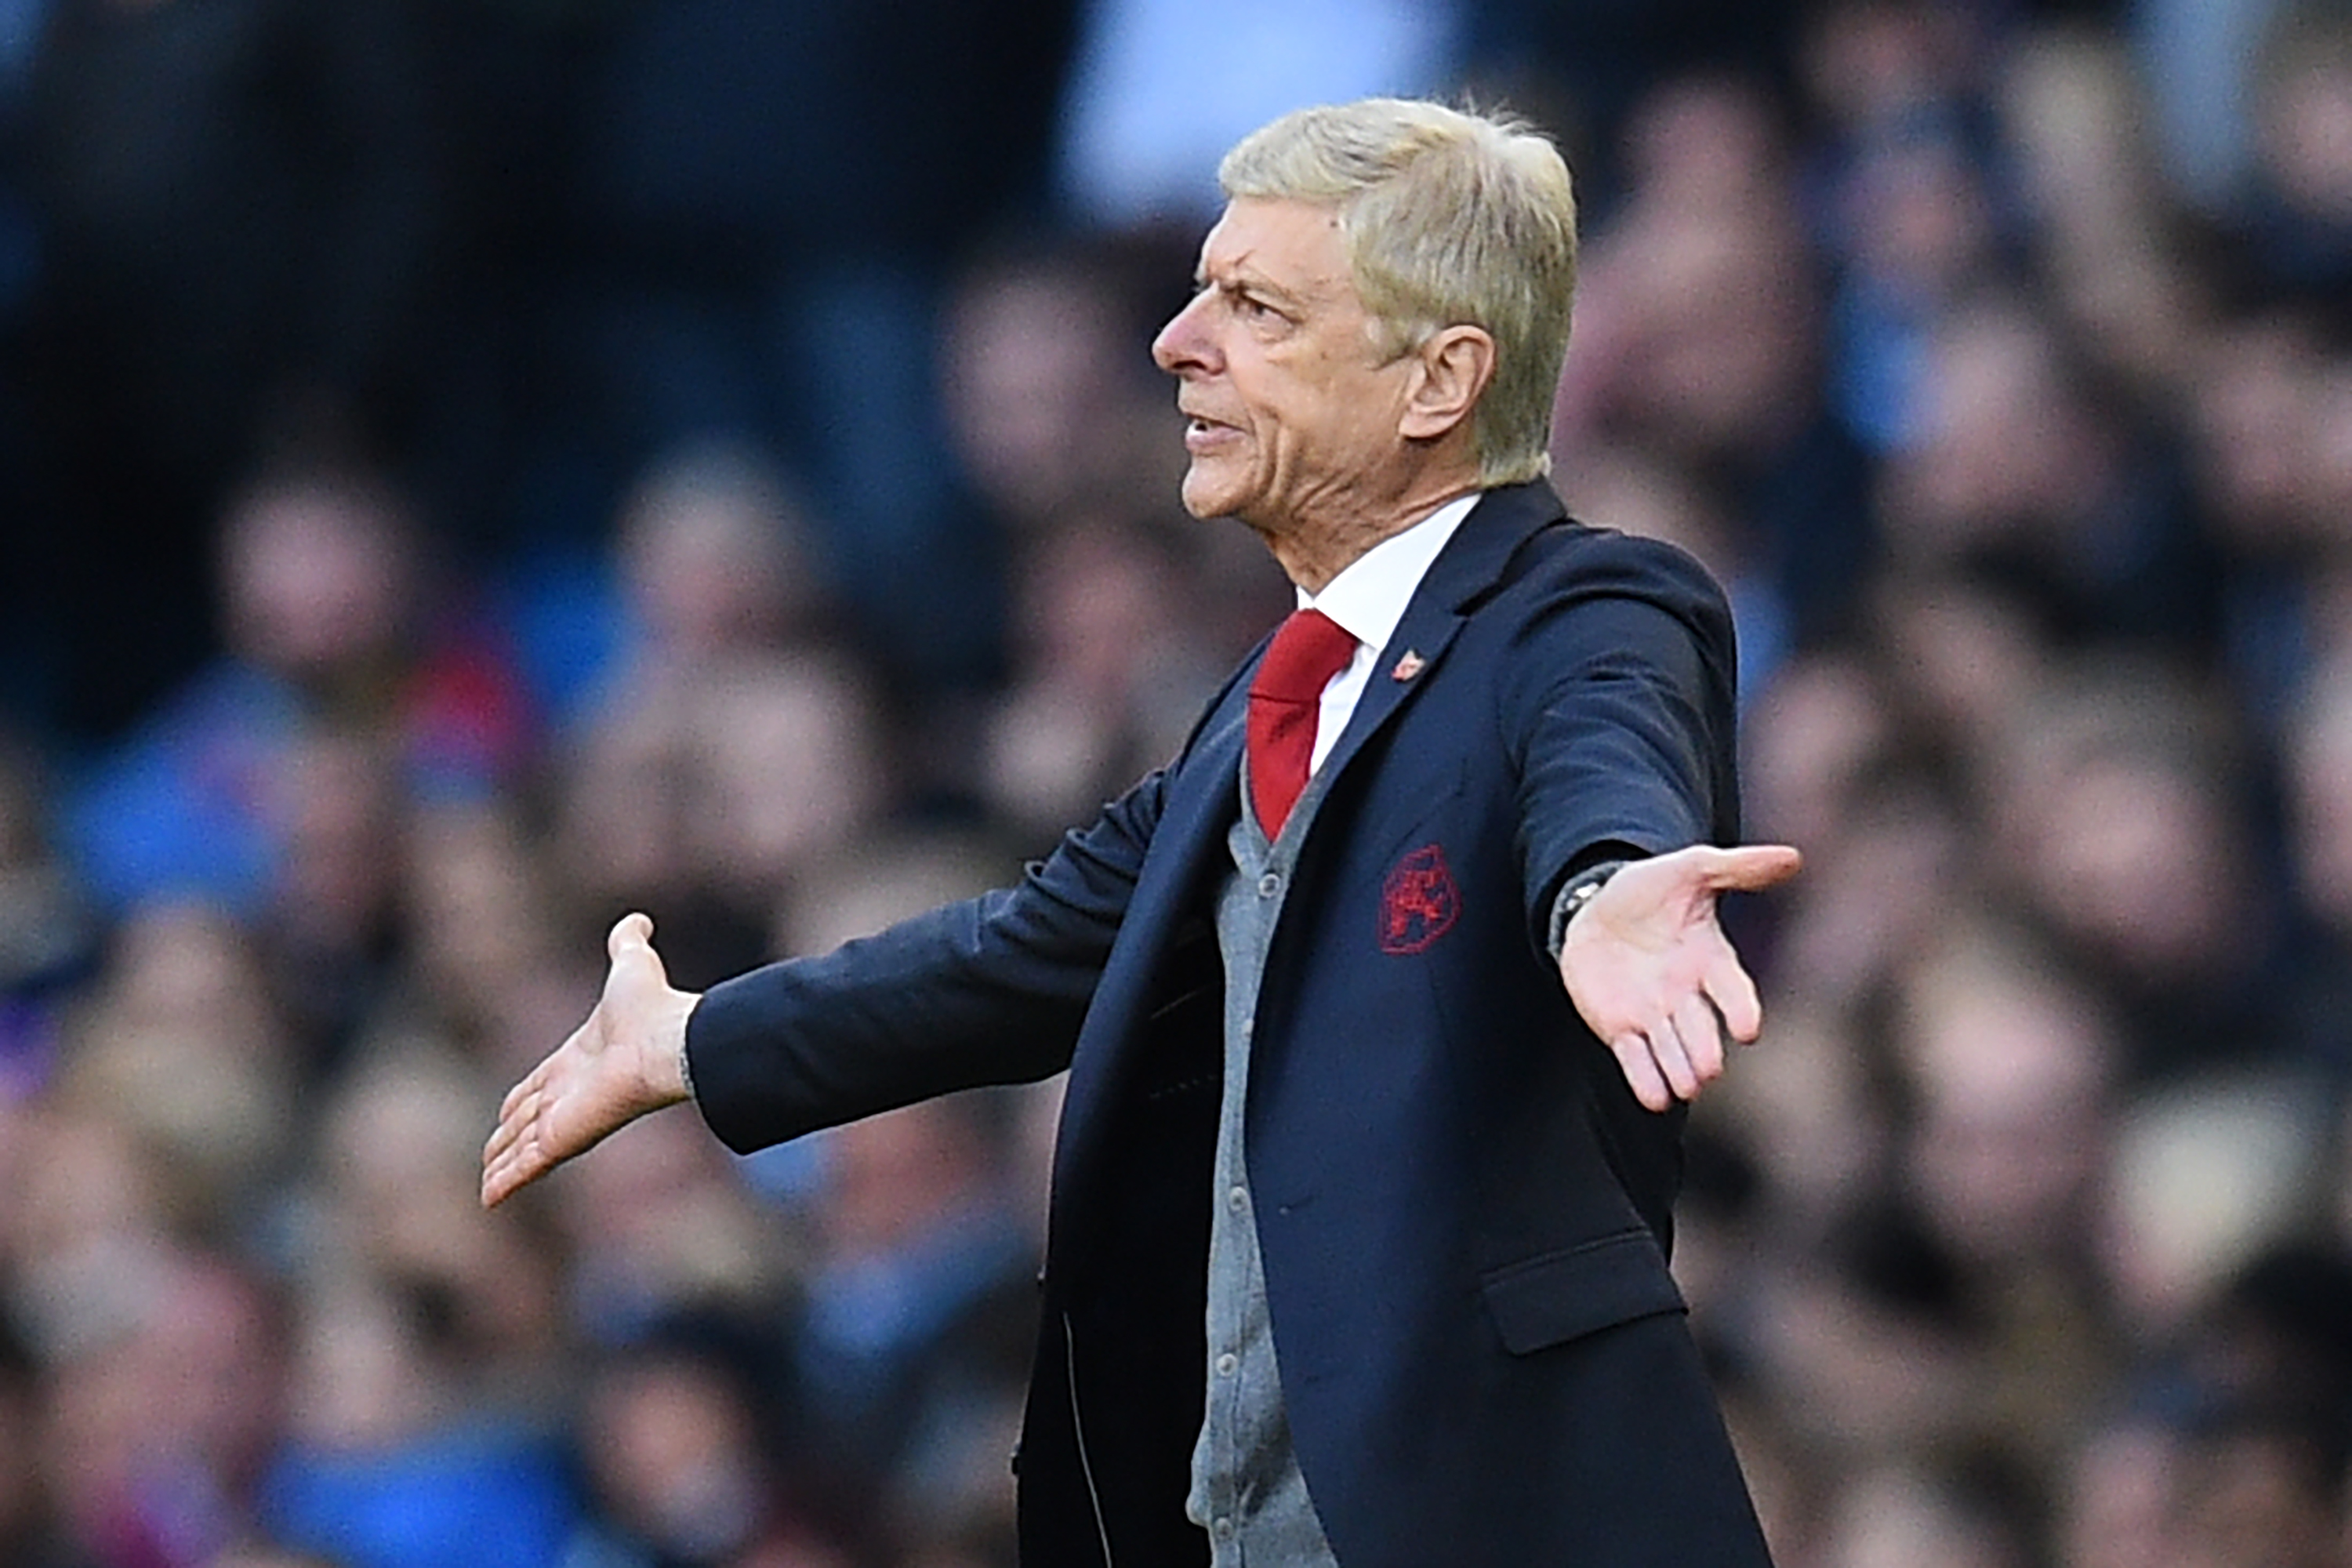 Arsenal's French manager Arsene Wenger gestures on the touchline during the English Premier League football match between Manchester City and Arsenal at the Etihad Stadium in Manchester, north west England, on November 5, 2017. / AFP PHOTO / Oli SCARFF / RESTRICTED TO EDITORIAL USE. No use with unauthorized audio, video, data, fixture lists, club/league logos or 'live' services. Online in-match use limited to 75 images, no video emulation. No use in betting, games or single club/league/player publications.  /         (Photo credit should read OLI SCARFF/AFP/Getty Images)